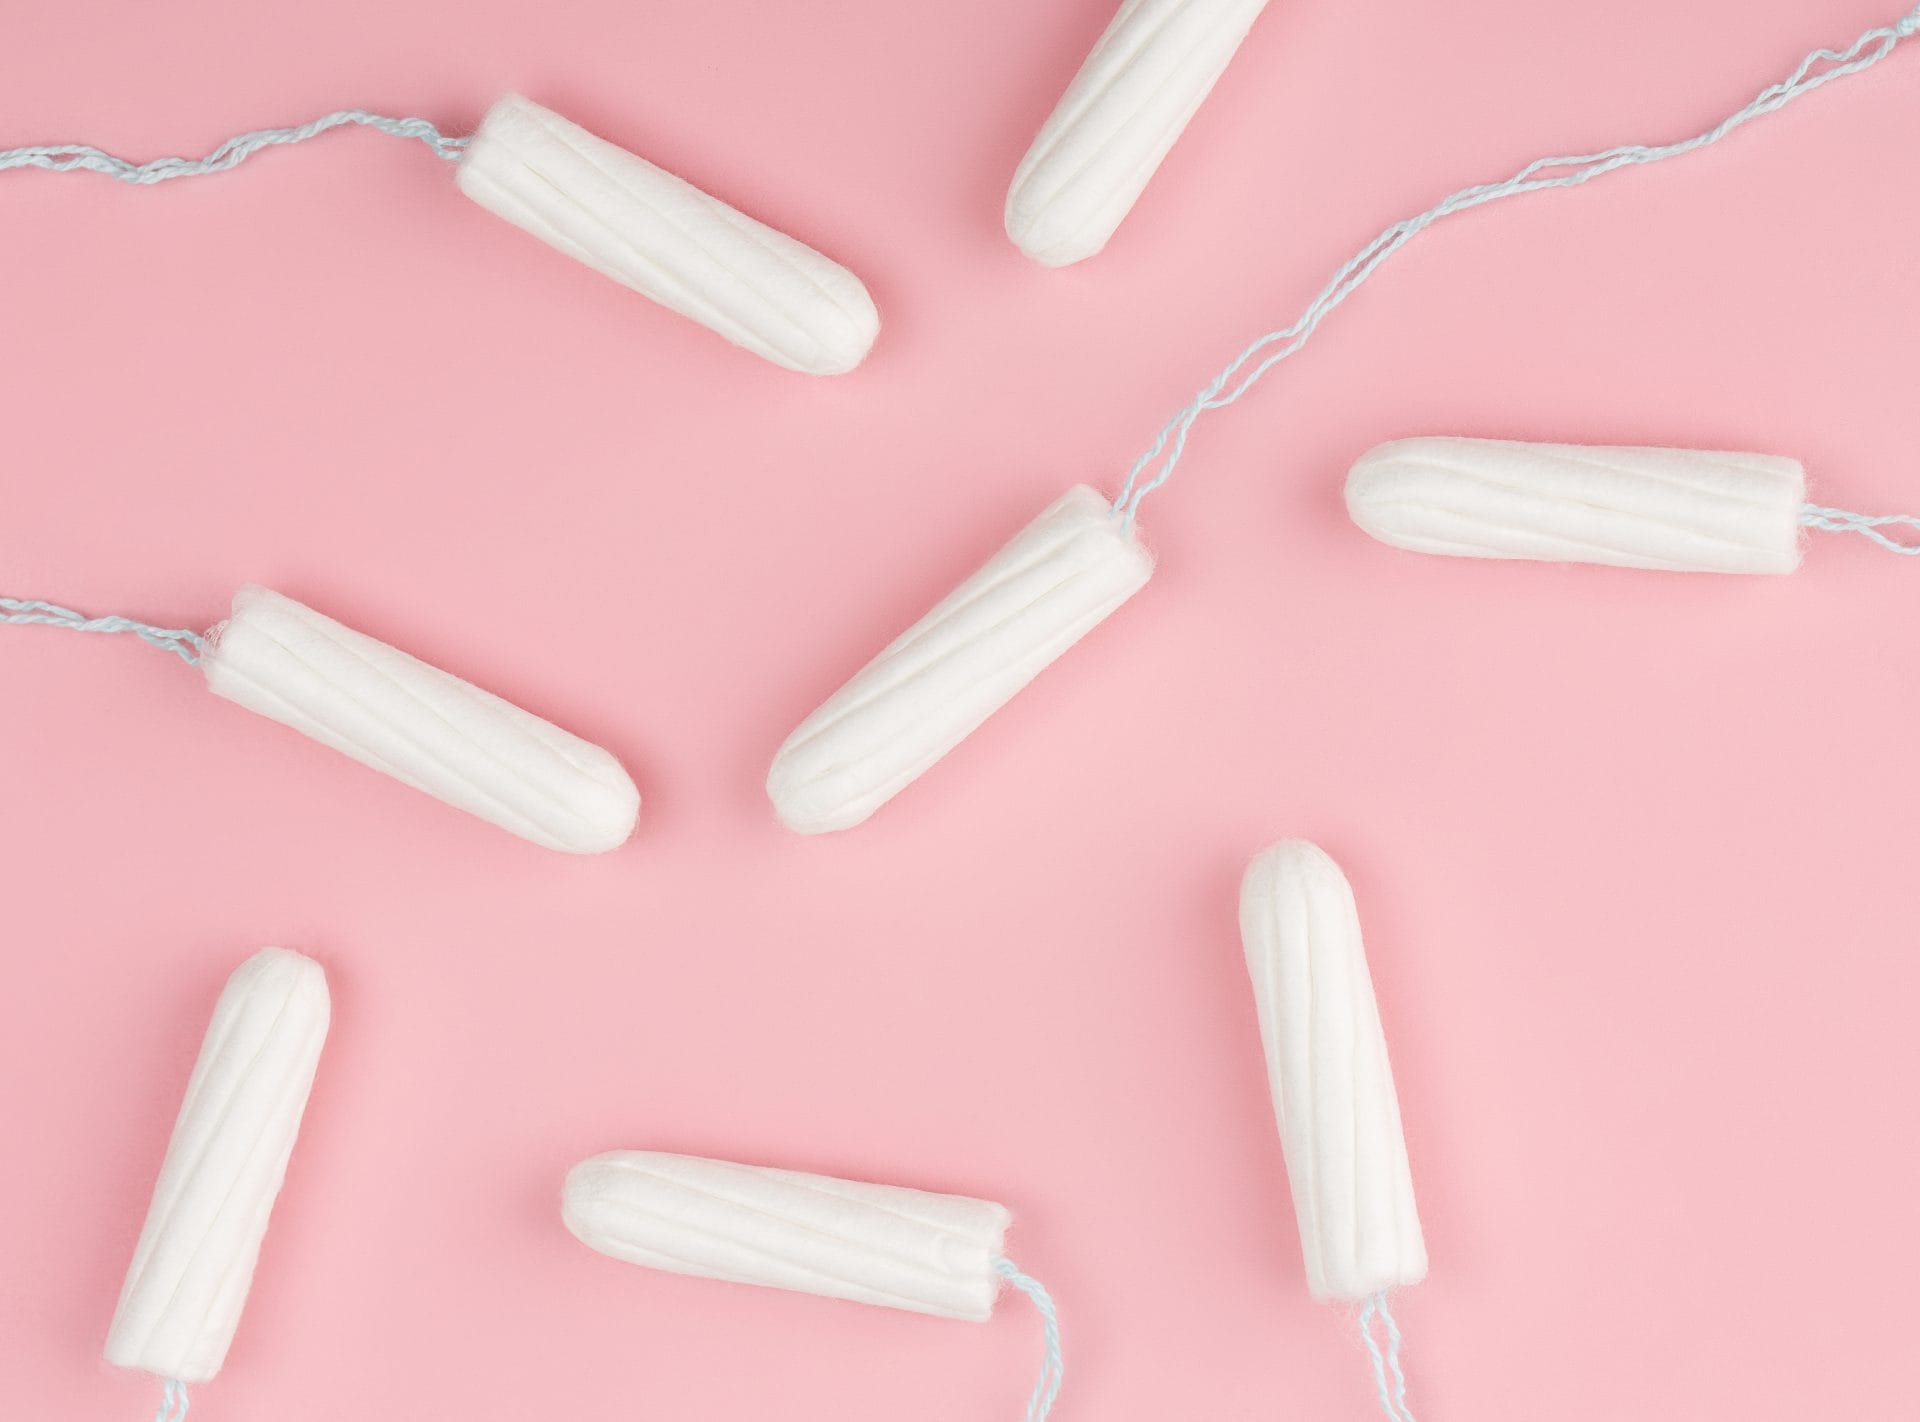 https://www.shutterstock.com/image-photo/medical-female-tampon-on-pink-background-1427647841